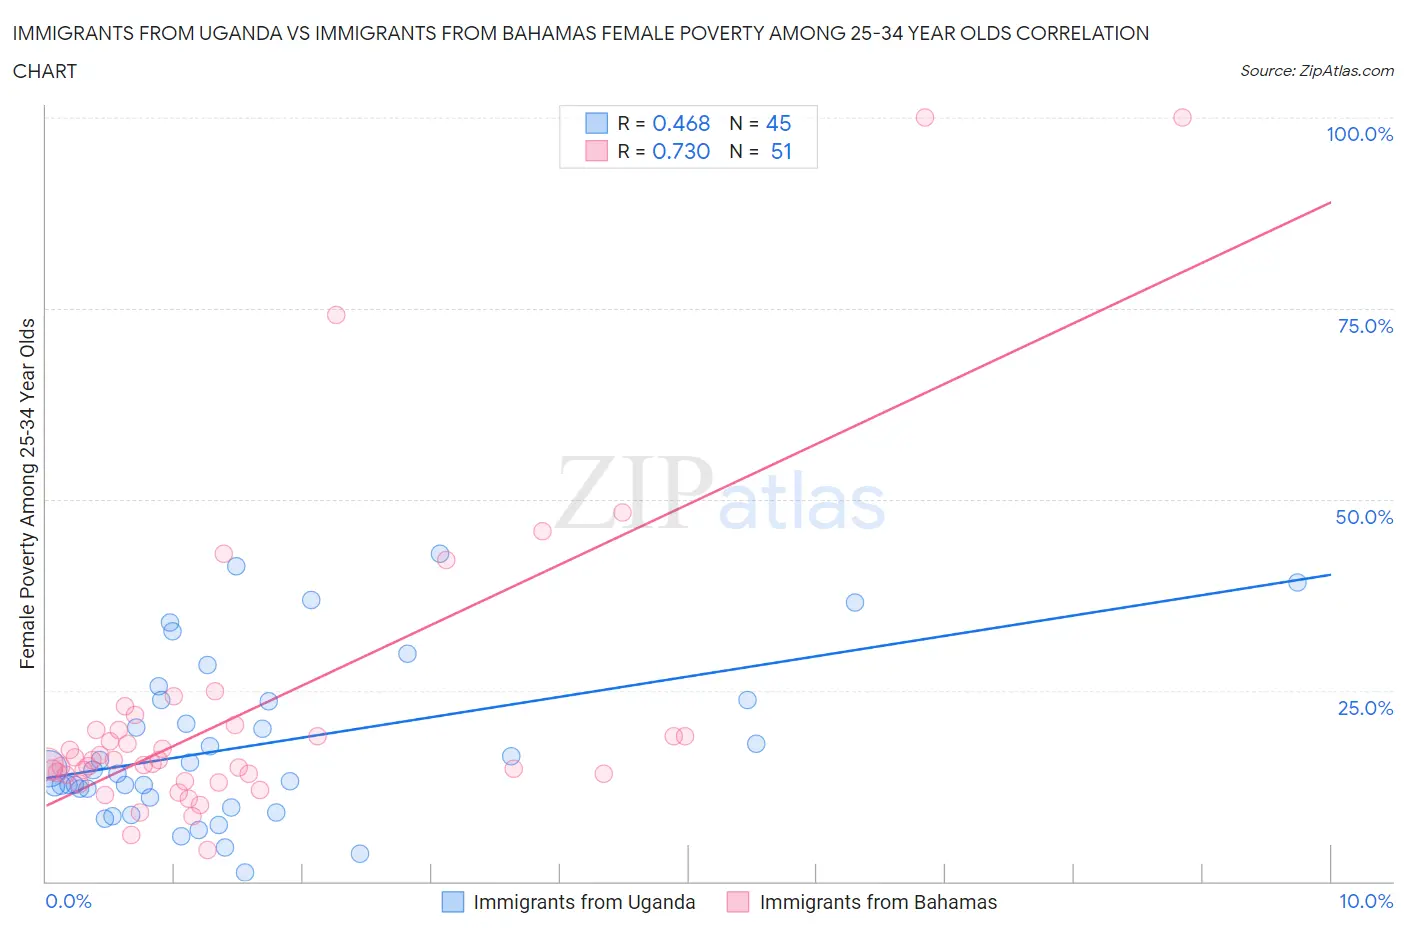 Immigrants from Uganda vs Immigrants from Bahamas Female Poverty Among 25-34 Year Olds